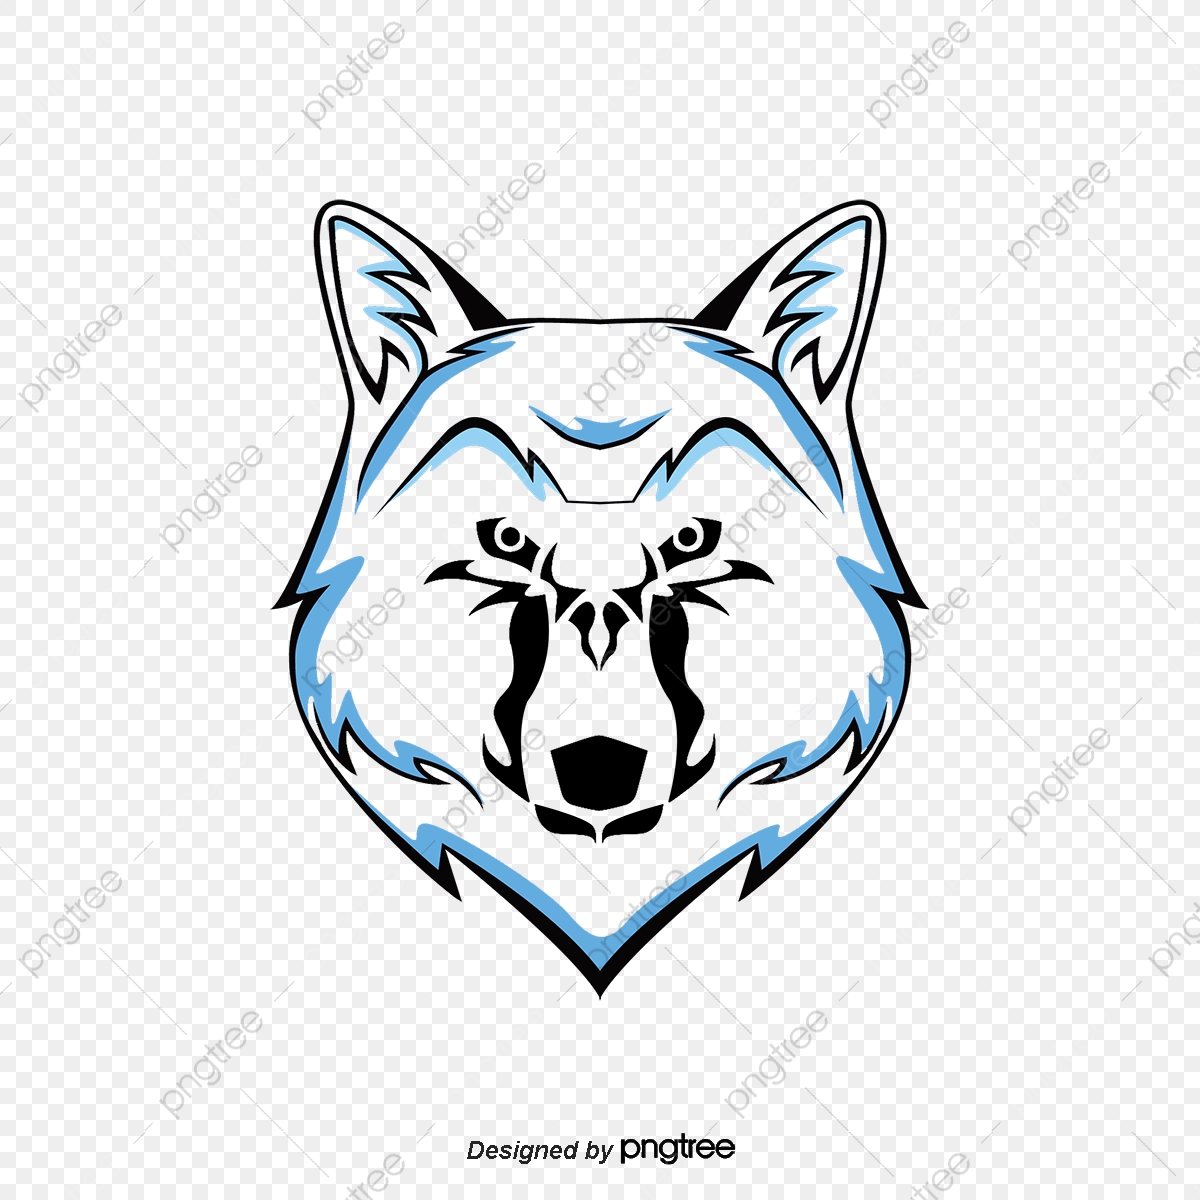 pngtree-wolf-png-image_2708256